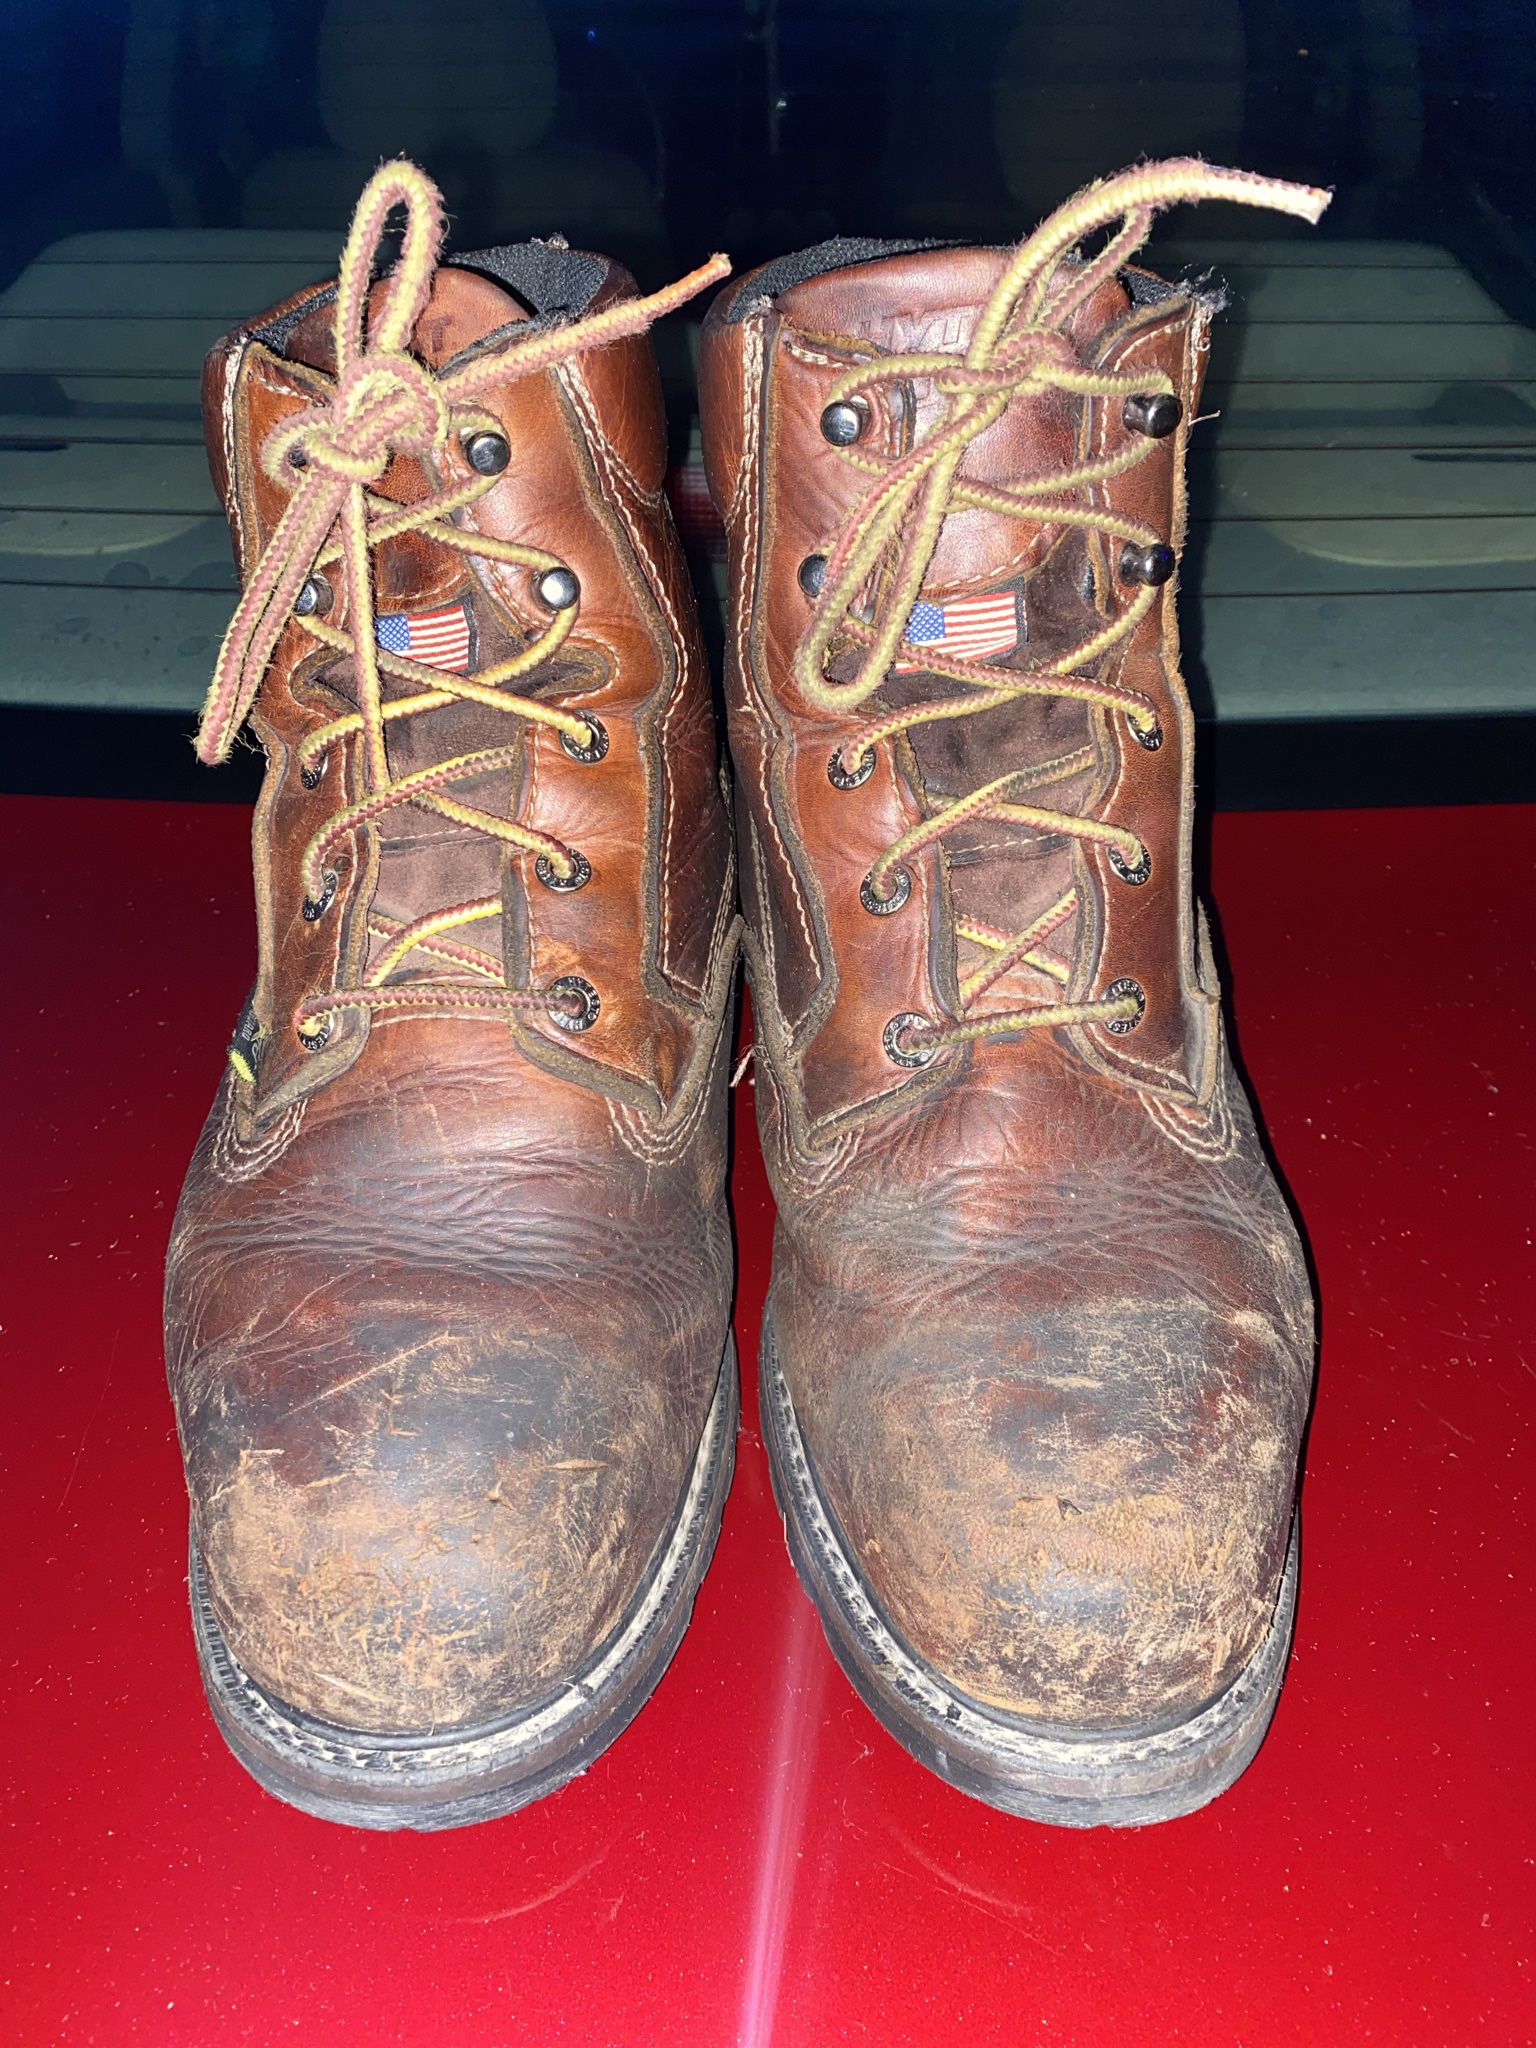 Size 11W work boots